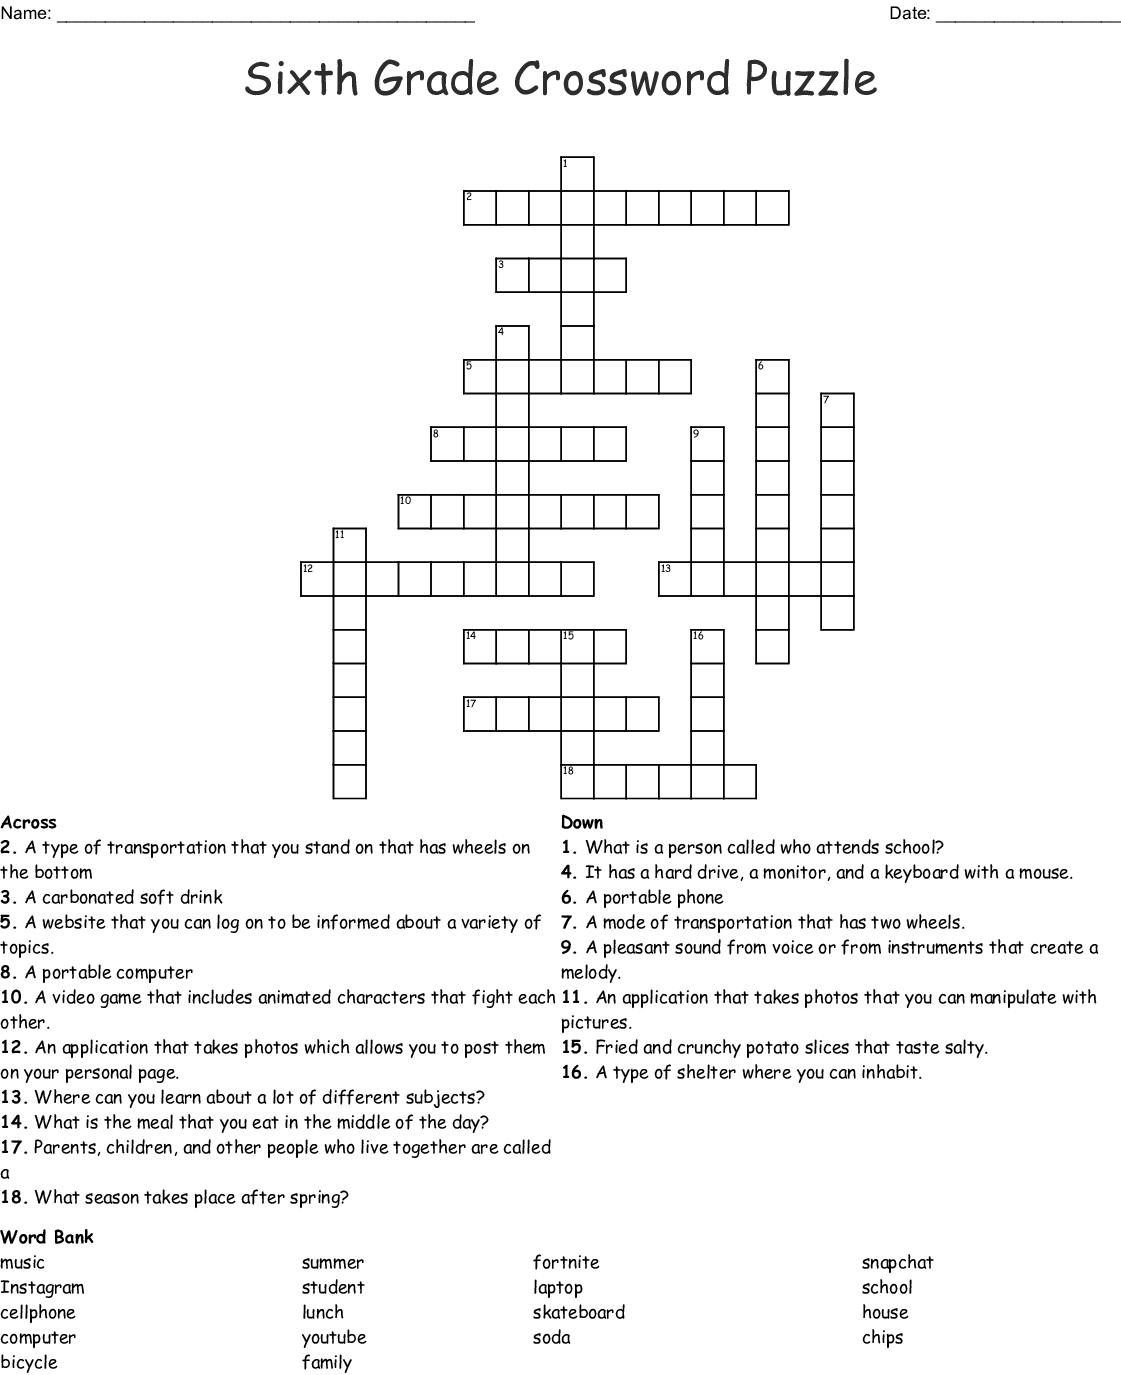 Printable Crosswords For 6th Grade Printable Crossword Puzzles Free 